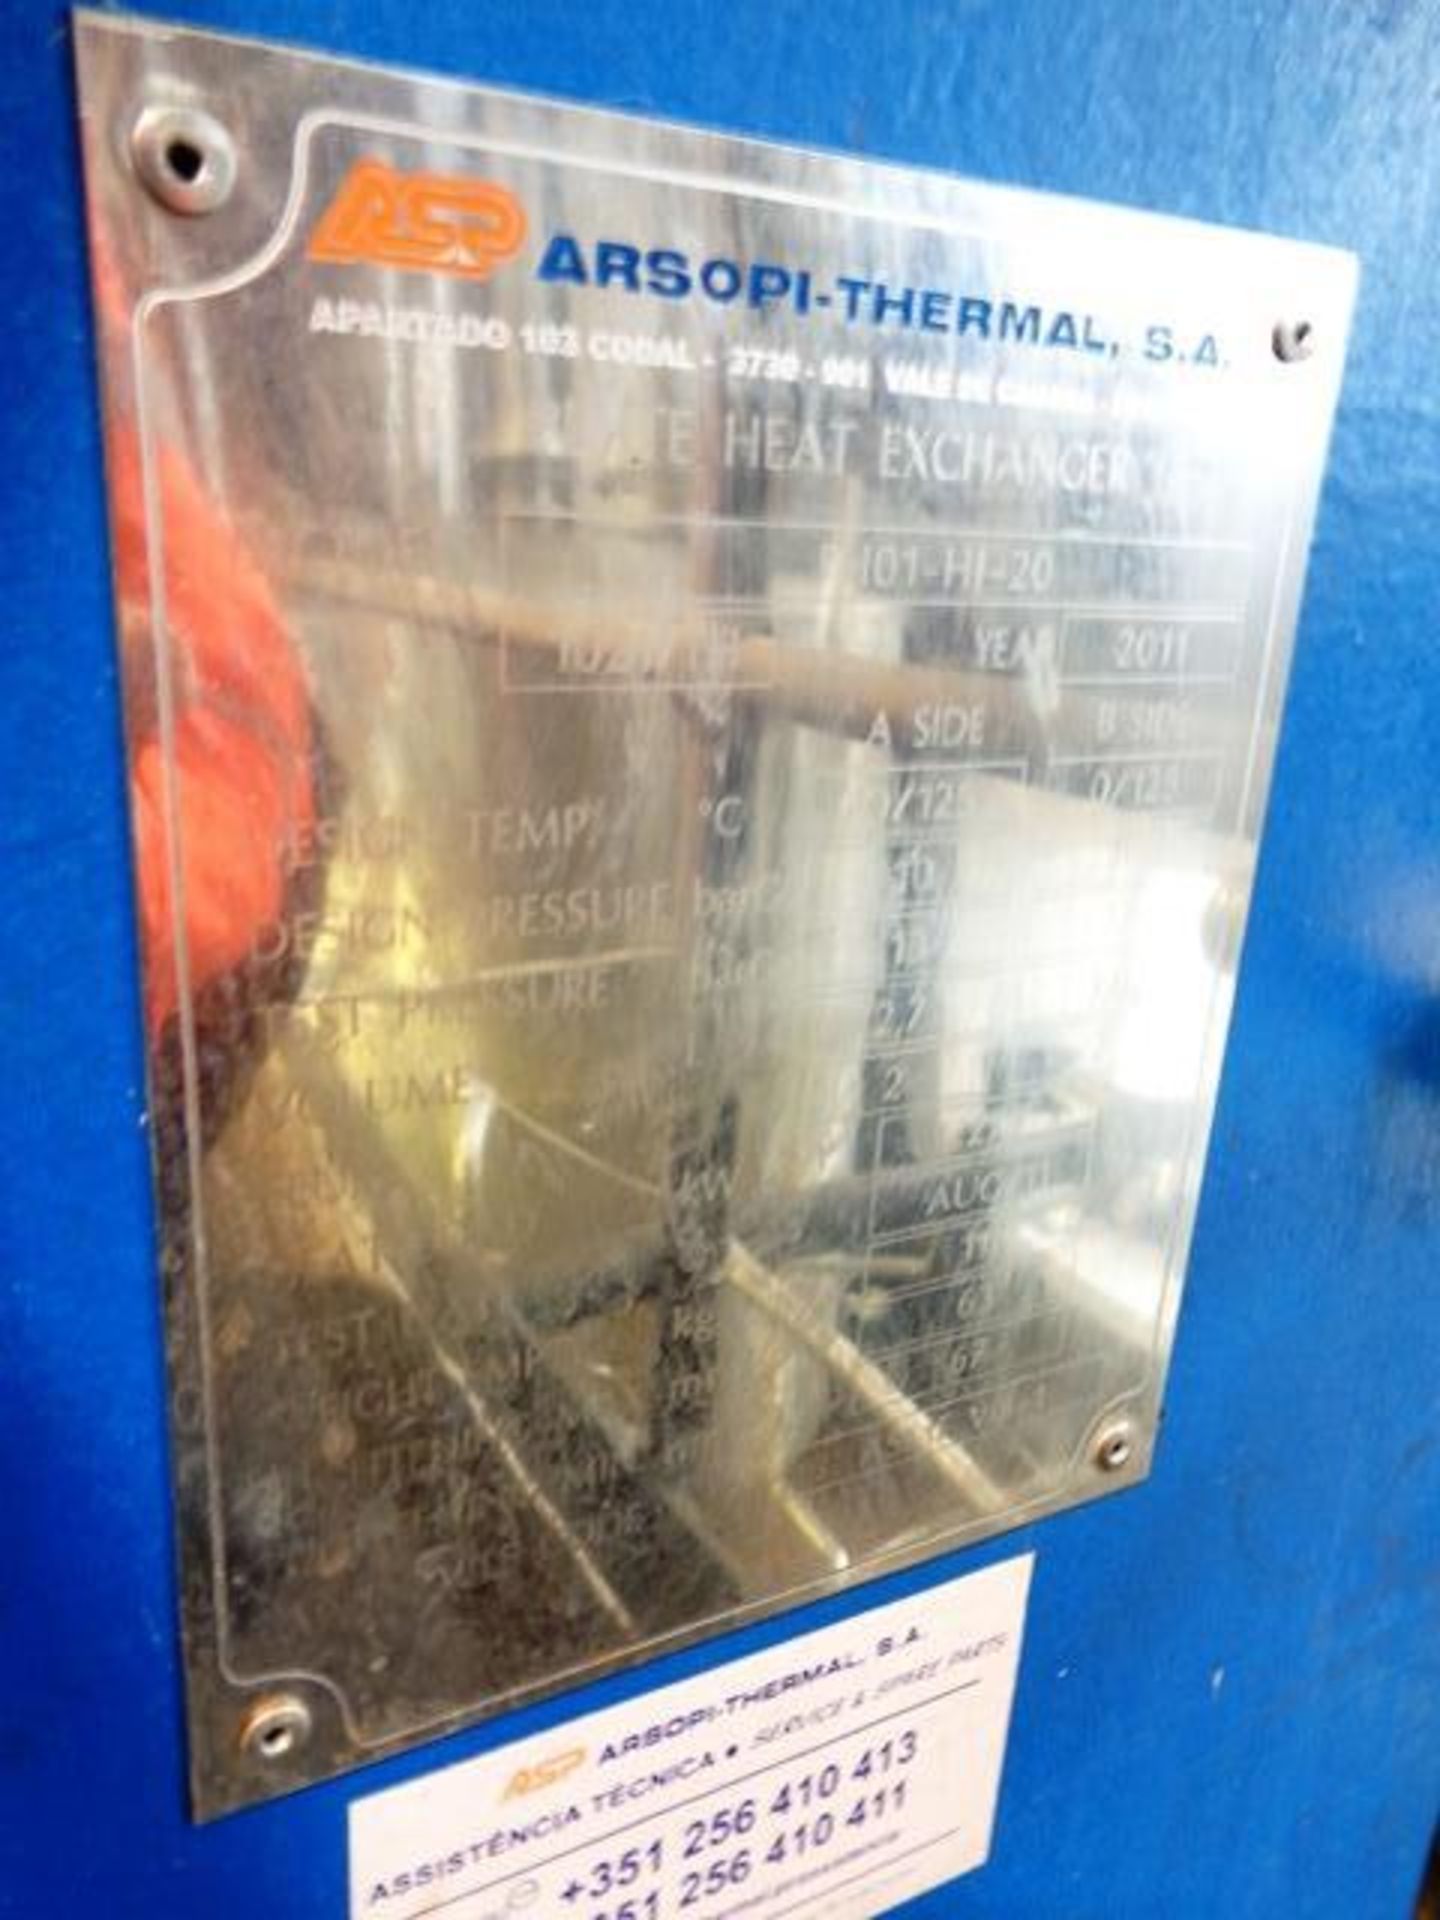 Arsopi-Thermal FH01-HJ-20 plate heat exchanger, serial no. 10217TH (2011), design temp 0/125, design - Image 2 of 3